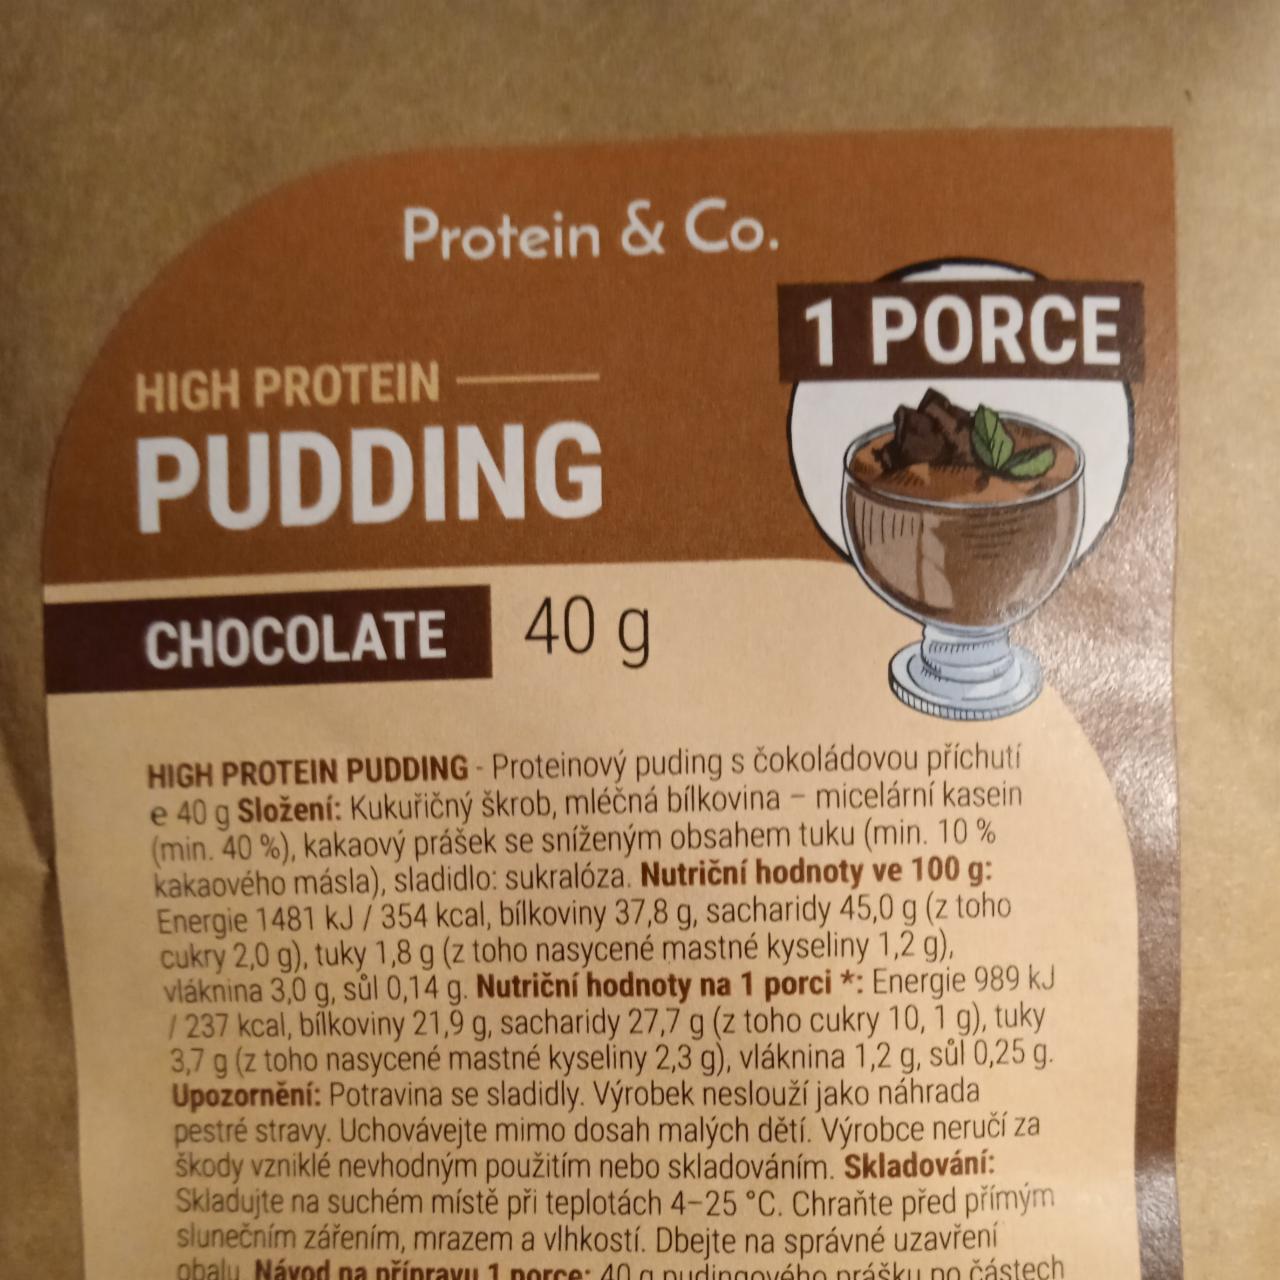 Fotografie - High protein pudding Chocolate Protein & Co.